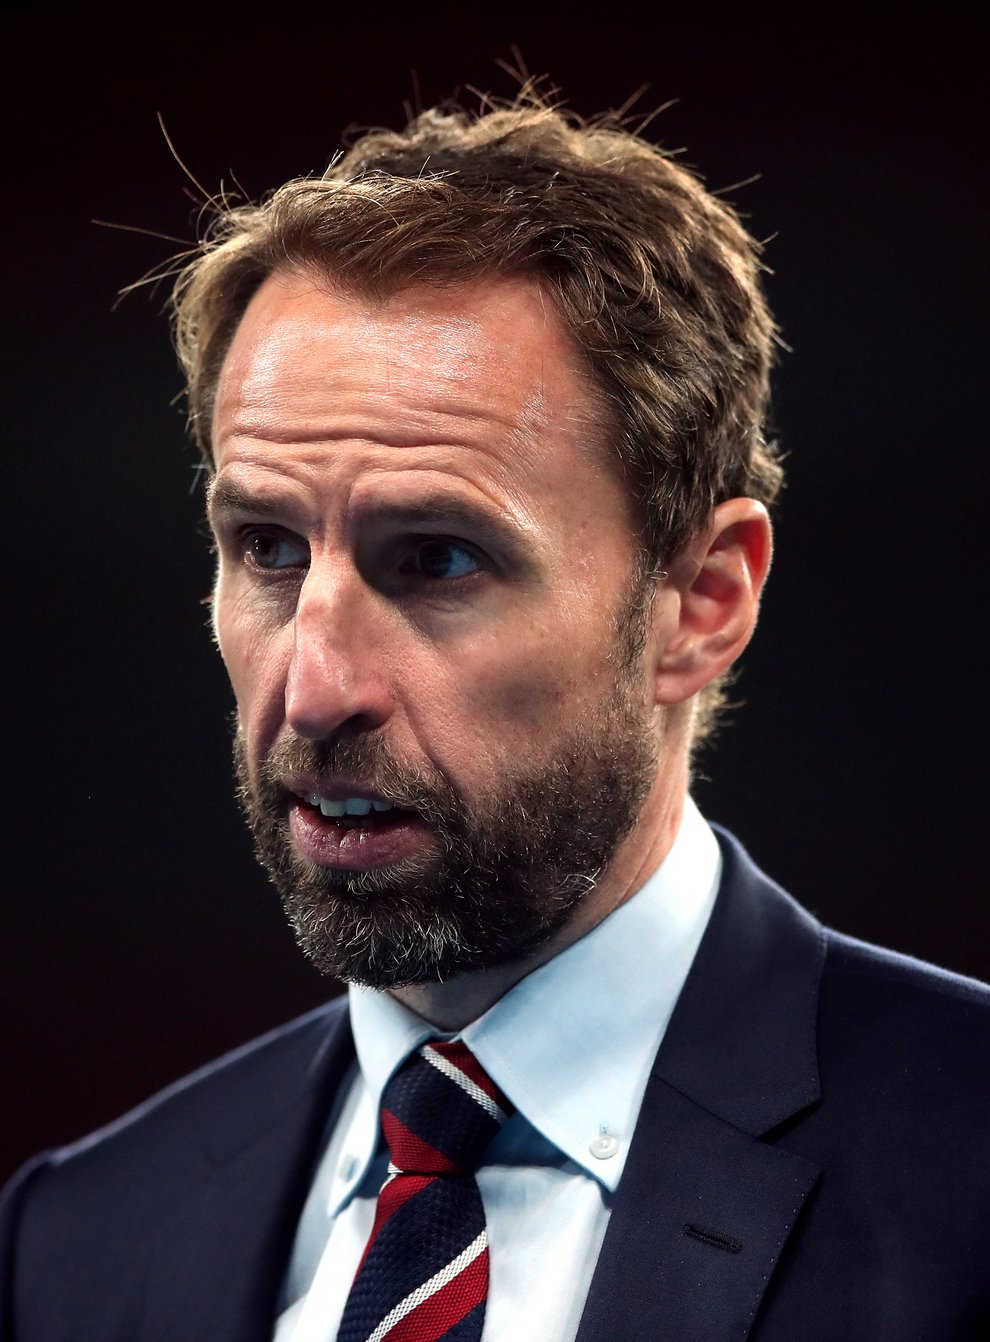 Gareth Southgate and England should be heading to Albania as planned